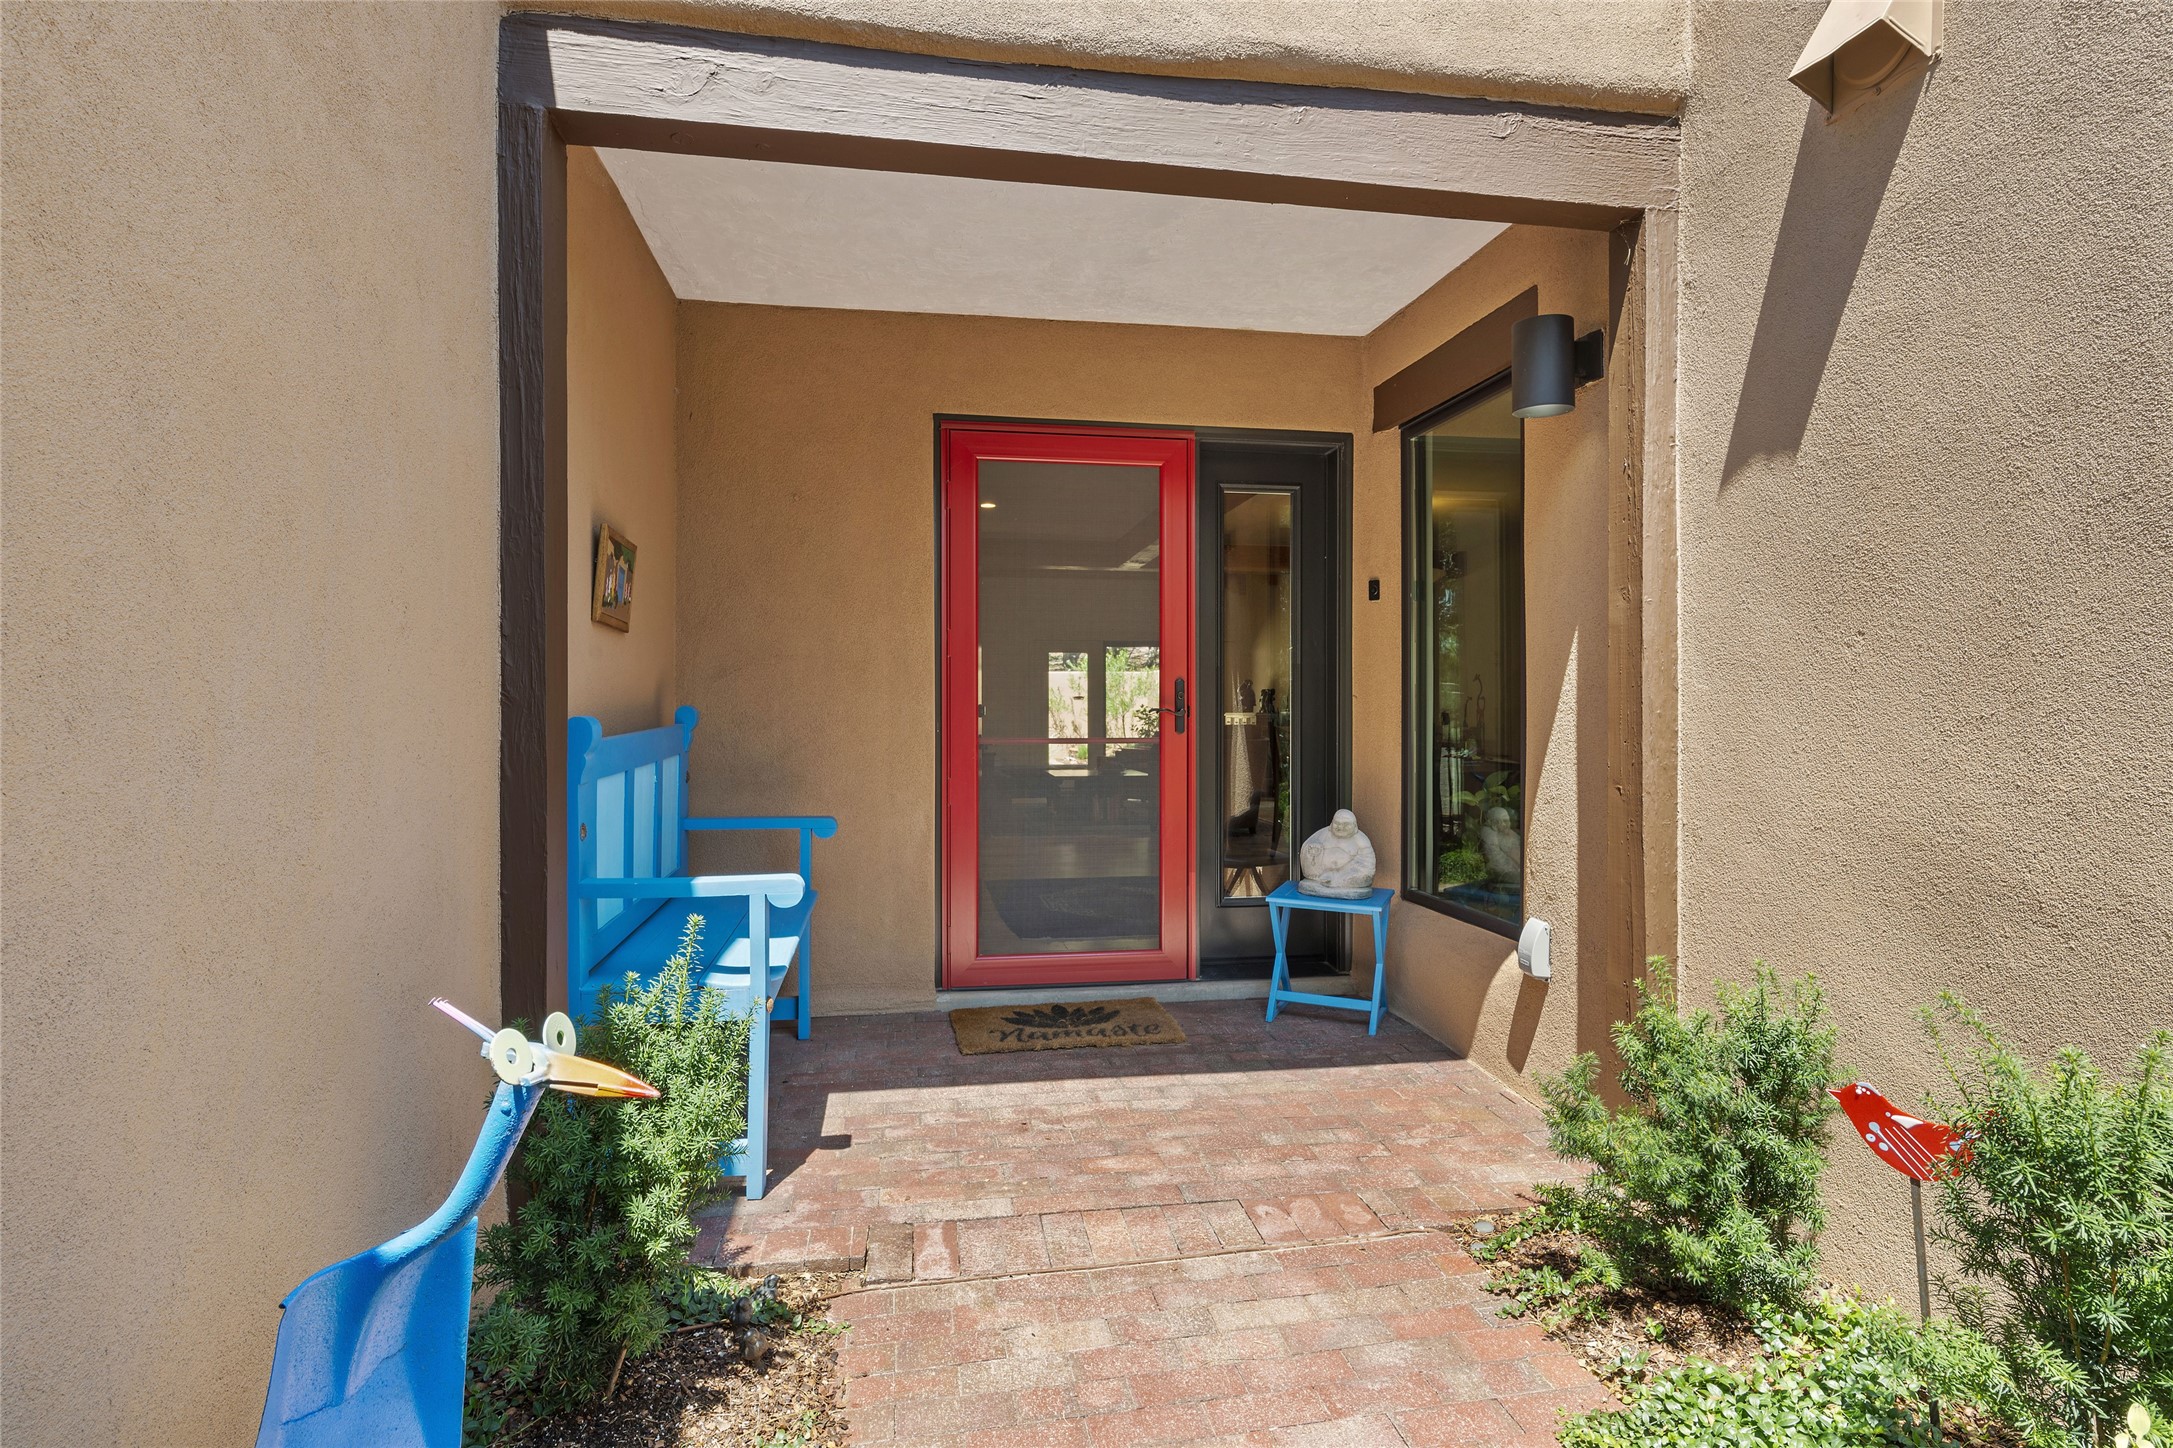 385 Calle Colina, Santa Fe, New Mexico 87501, 2 Bedrooms Bedrooms, ,2 BathroomsBathrooms,Residential,For Sale,385 Calle Colina,202400358